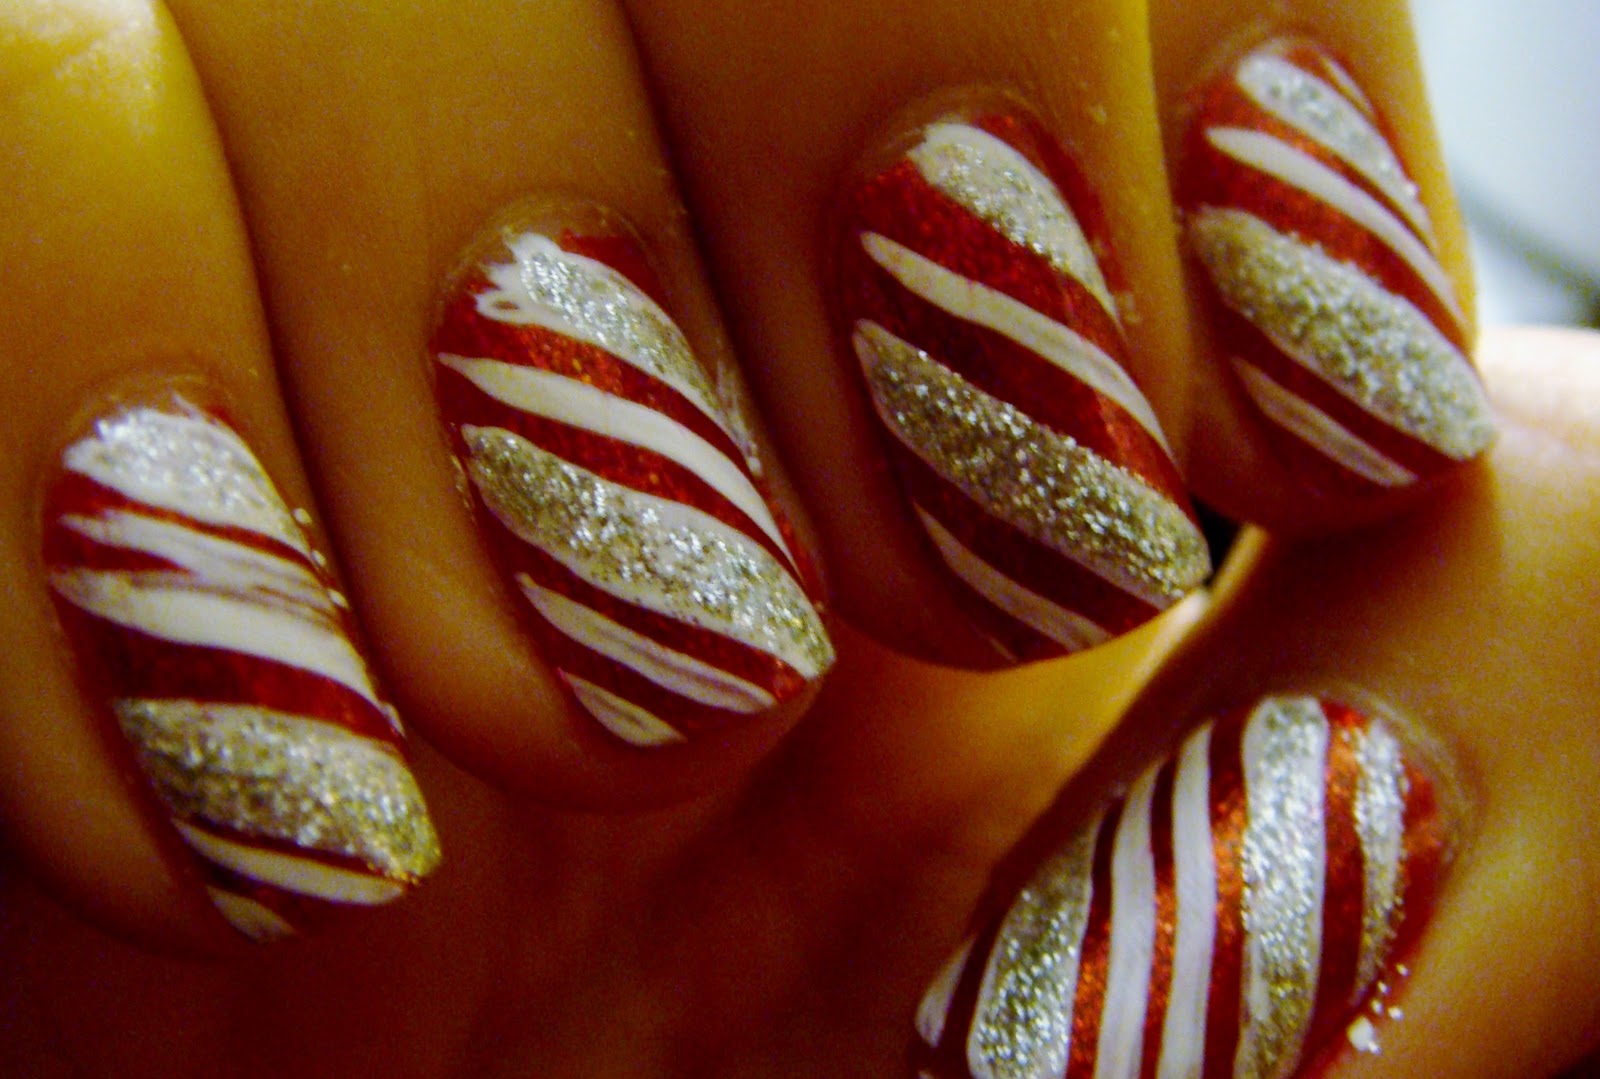 6. Glittery Candy Cane Nails - wide 5